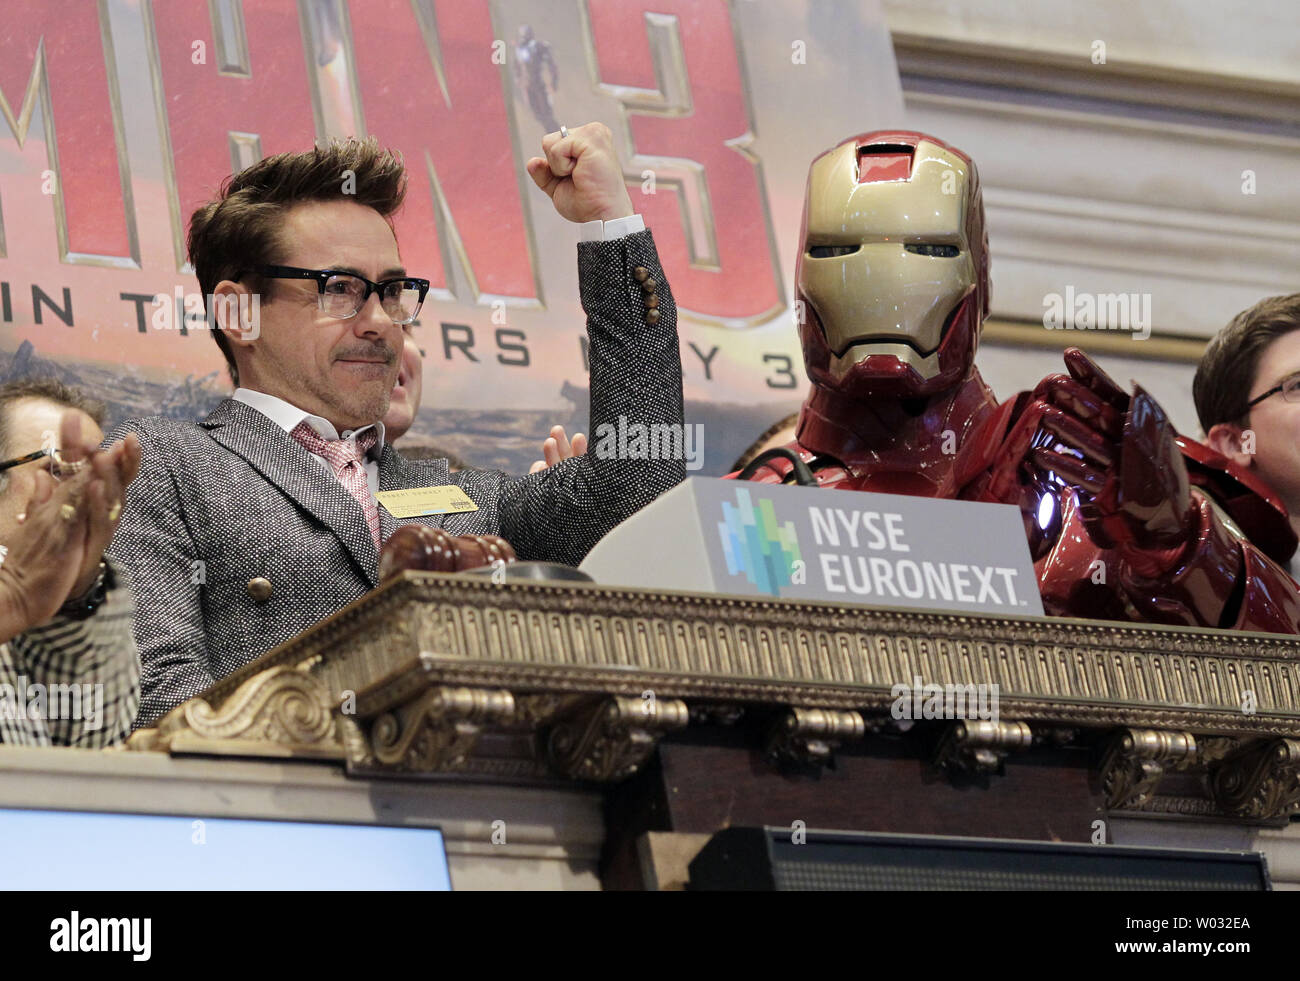 Actor Robert Downey Jr. promotes the upcoming release of 'Iron Man 3' by ringing the opening bell at the New York Stock Exchange on Wall Street In New York City on April 30, 2013.    UPI/John Angelillo Stock Photo